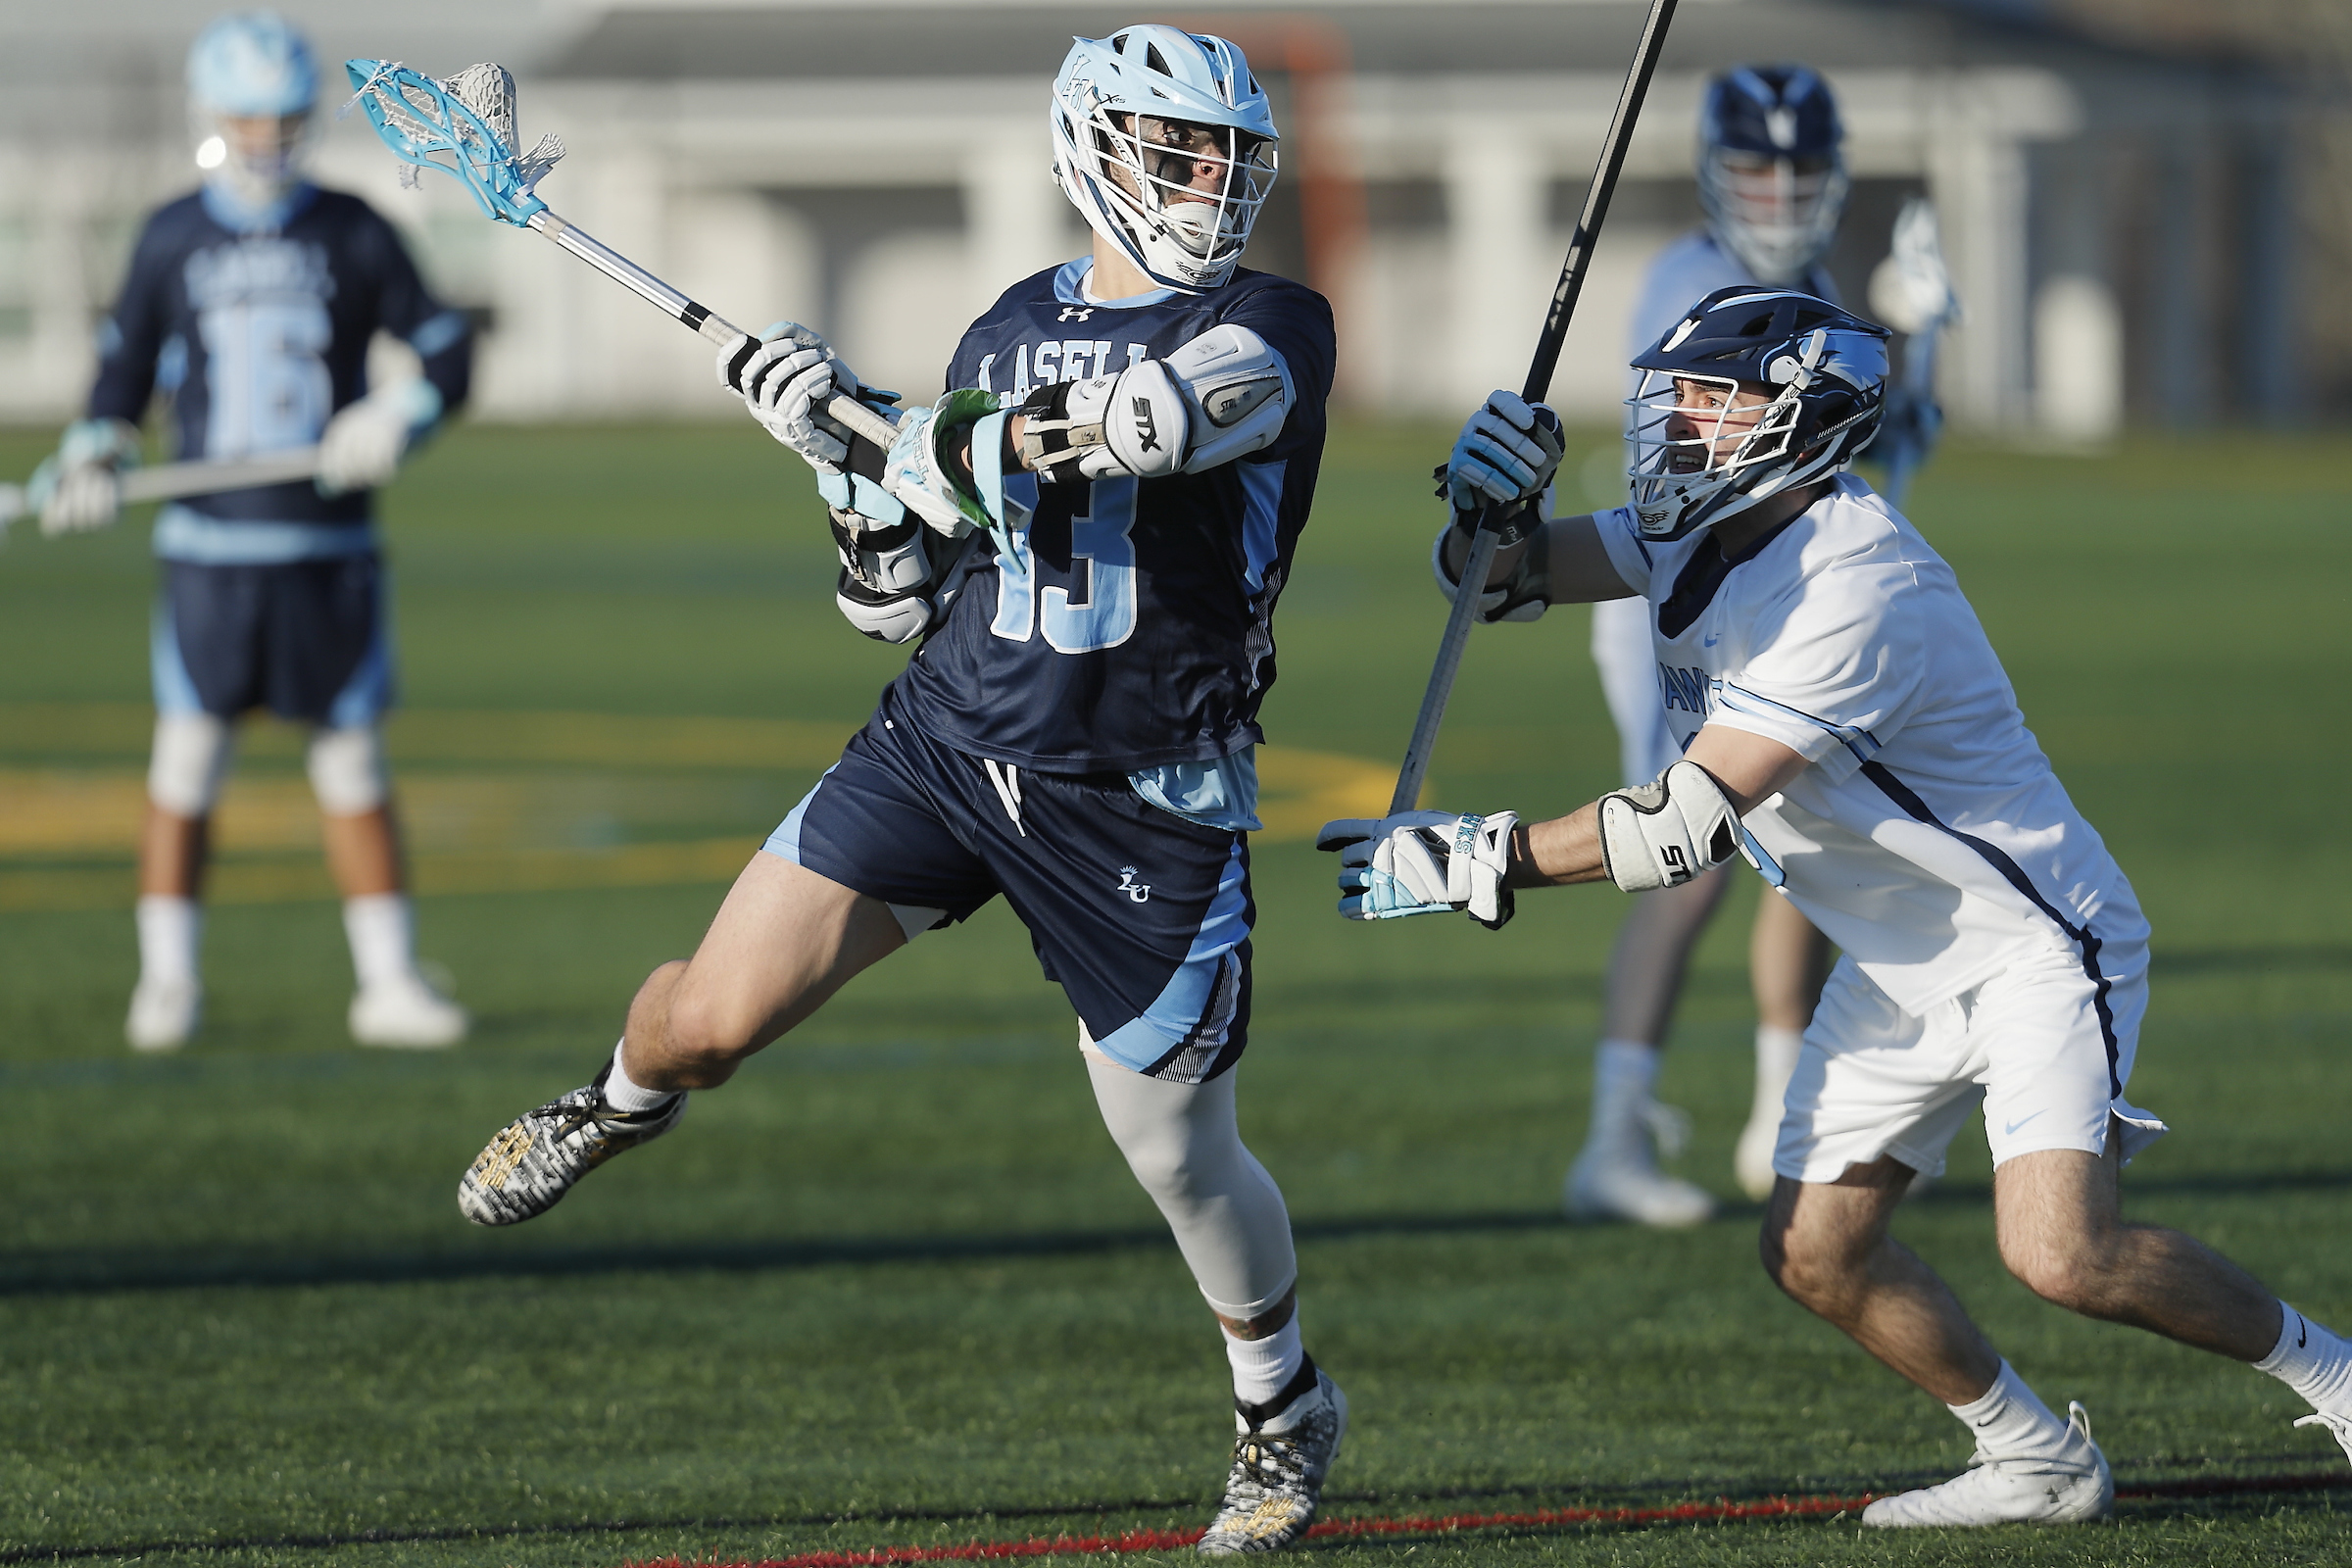 MLax: Lasers Drop Opening Game of the Season